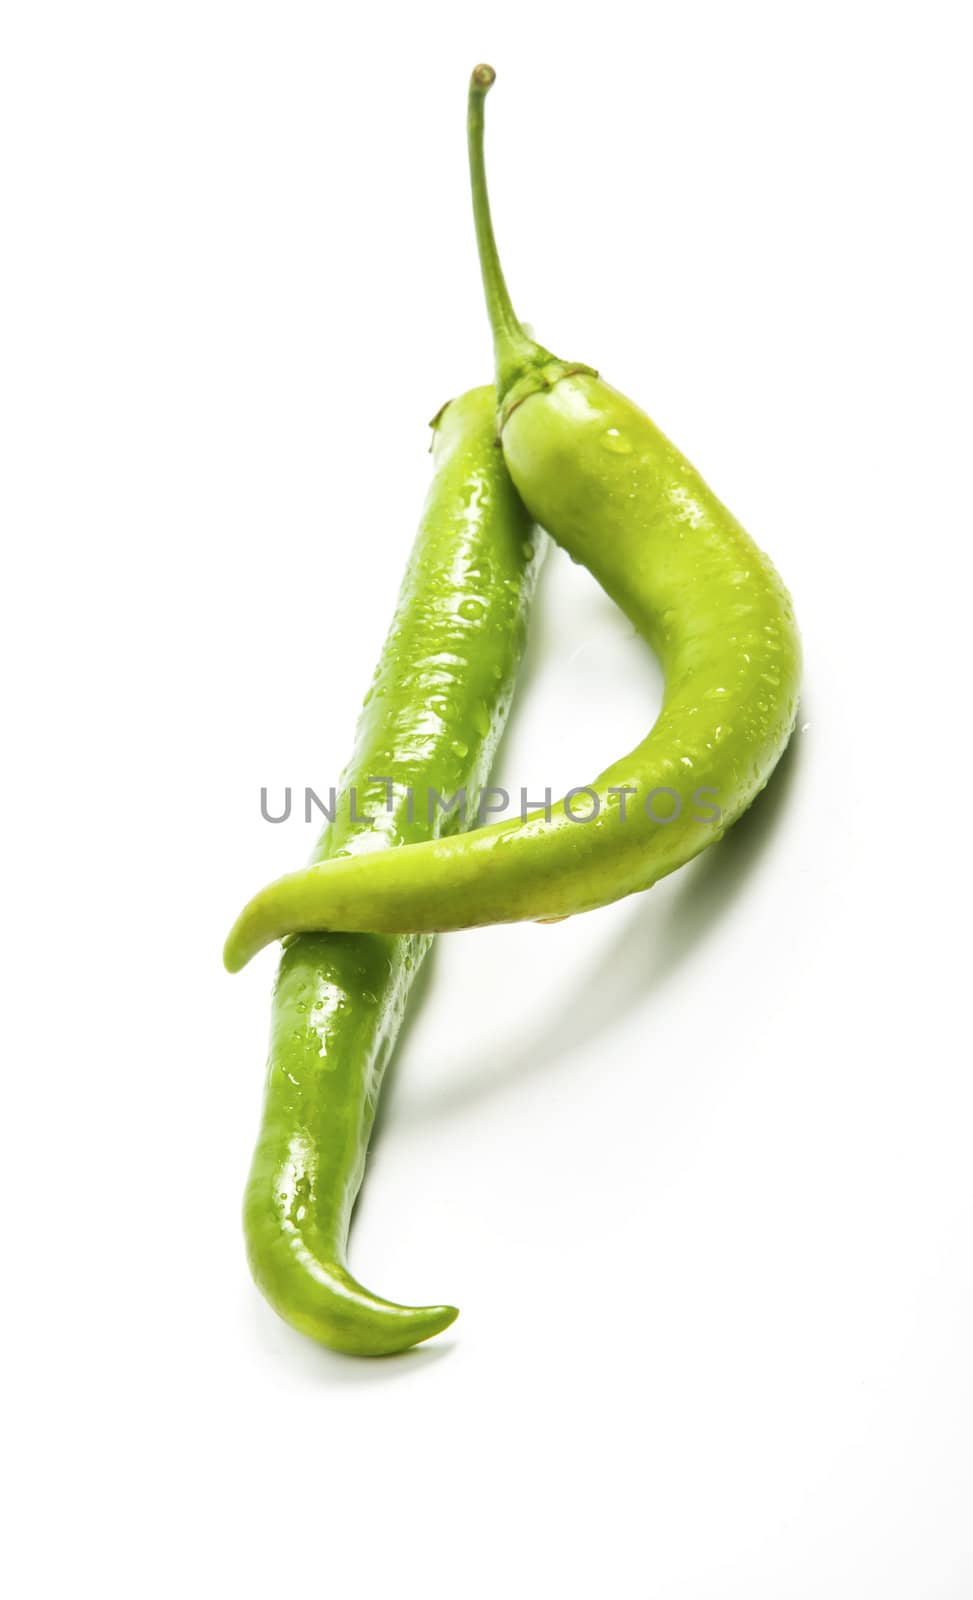 Green chili peppers composition by RawGroup